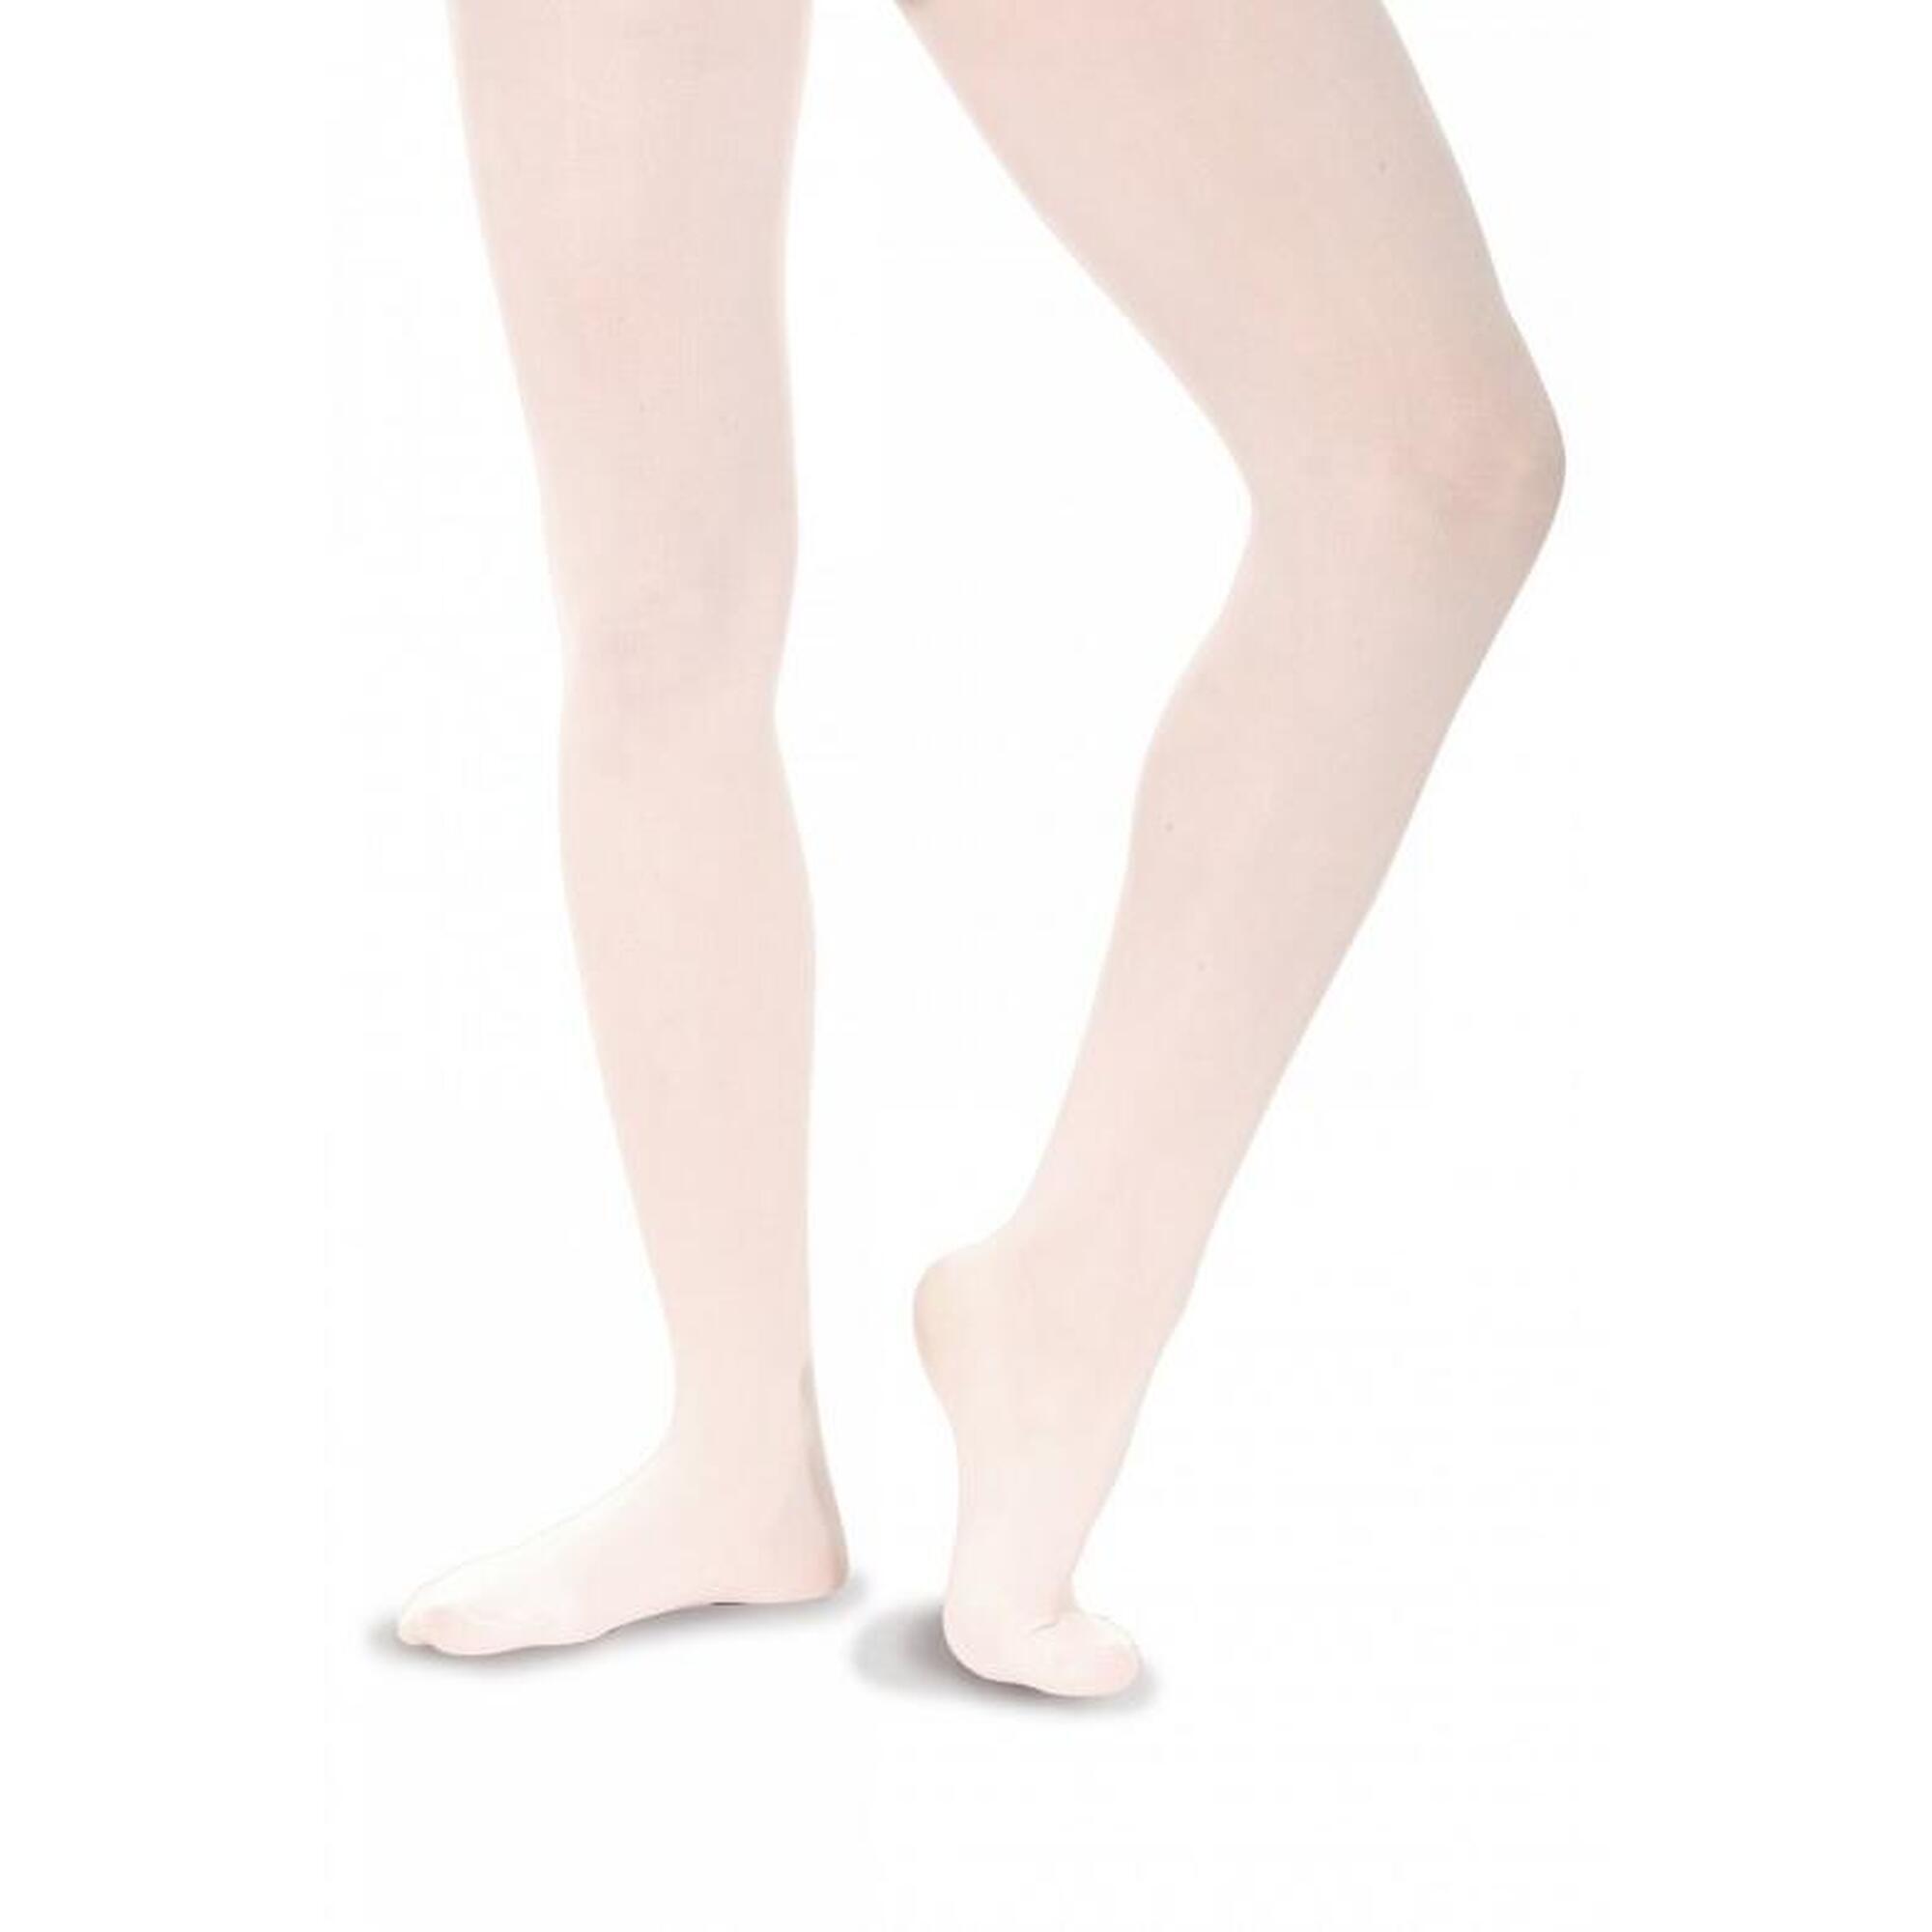 ROCH VALLEY The traditional seamless economy ballet tights from Roch Valley